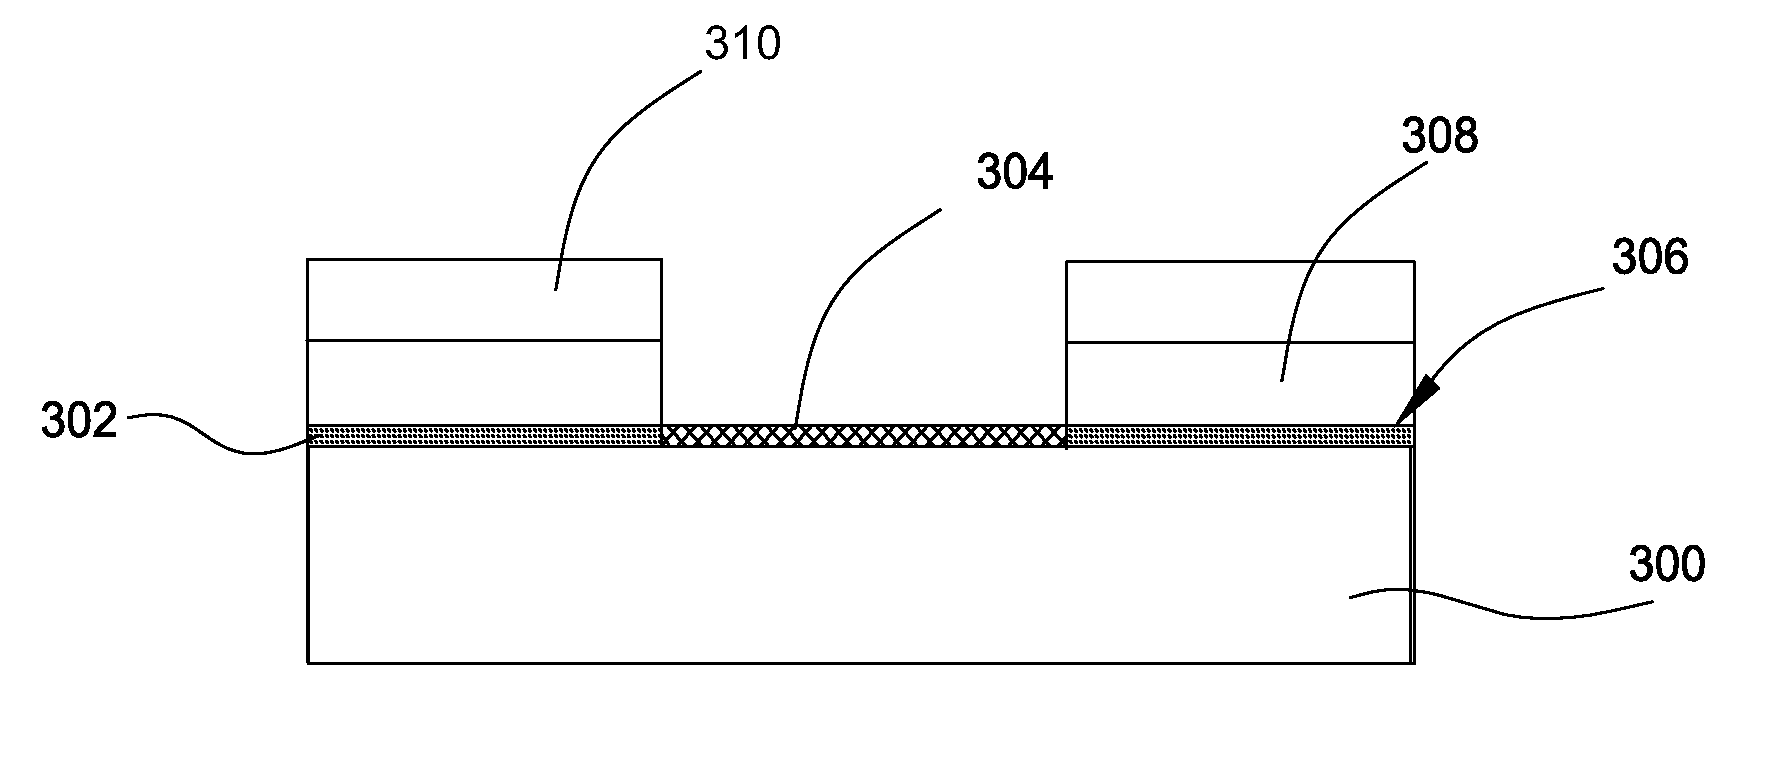 Method of epitaxial doped germanium tin alloy formation